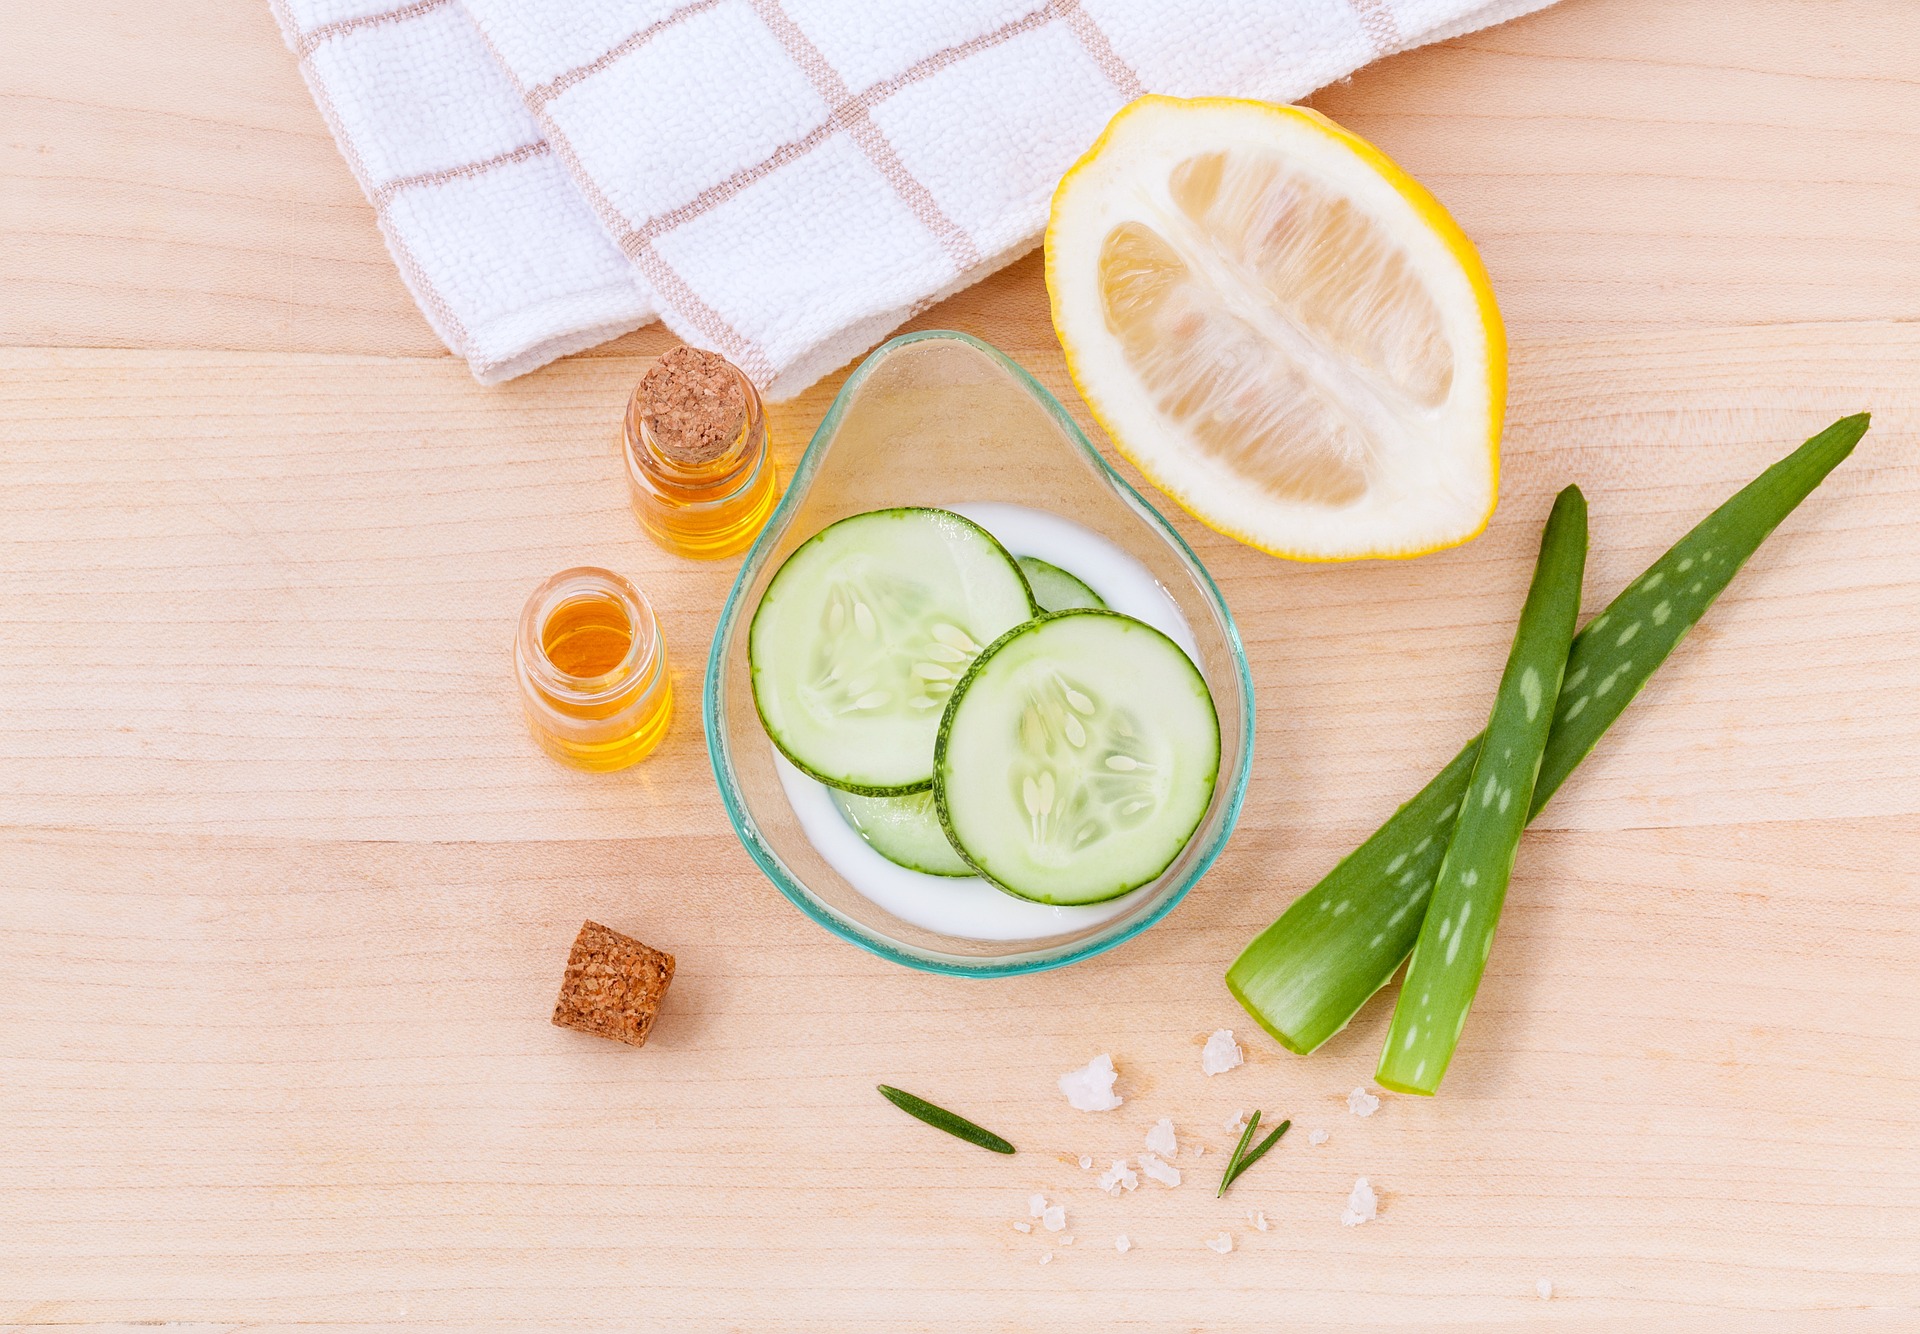 {DIY Beauty} Your Own Spa Treatment From Your Kitchen